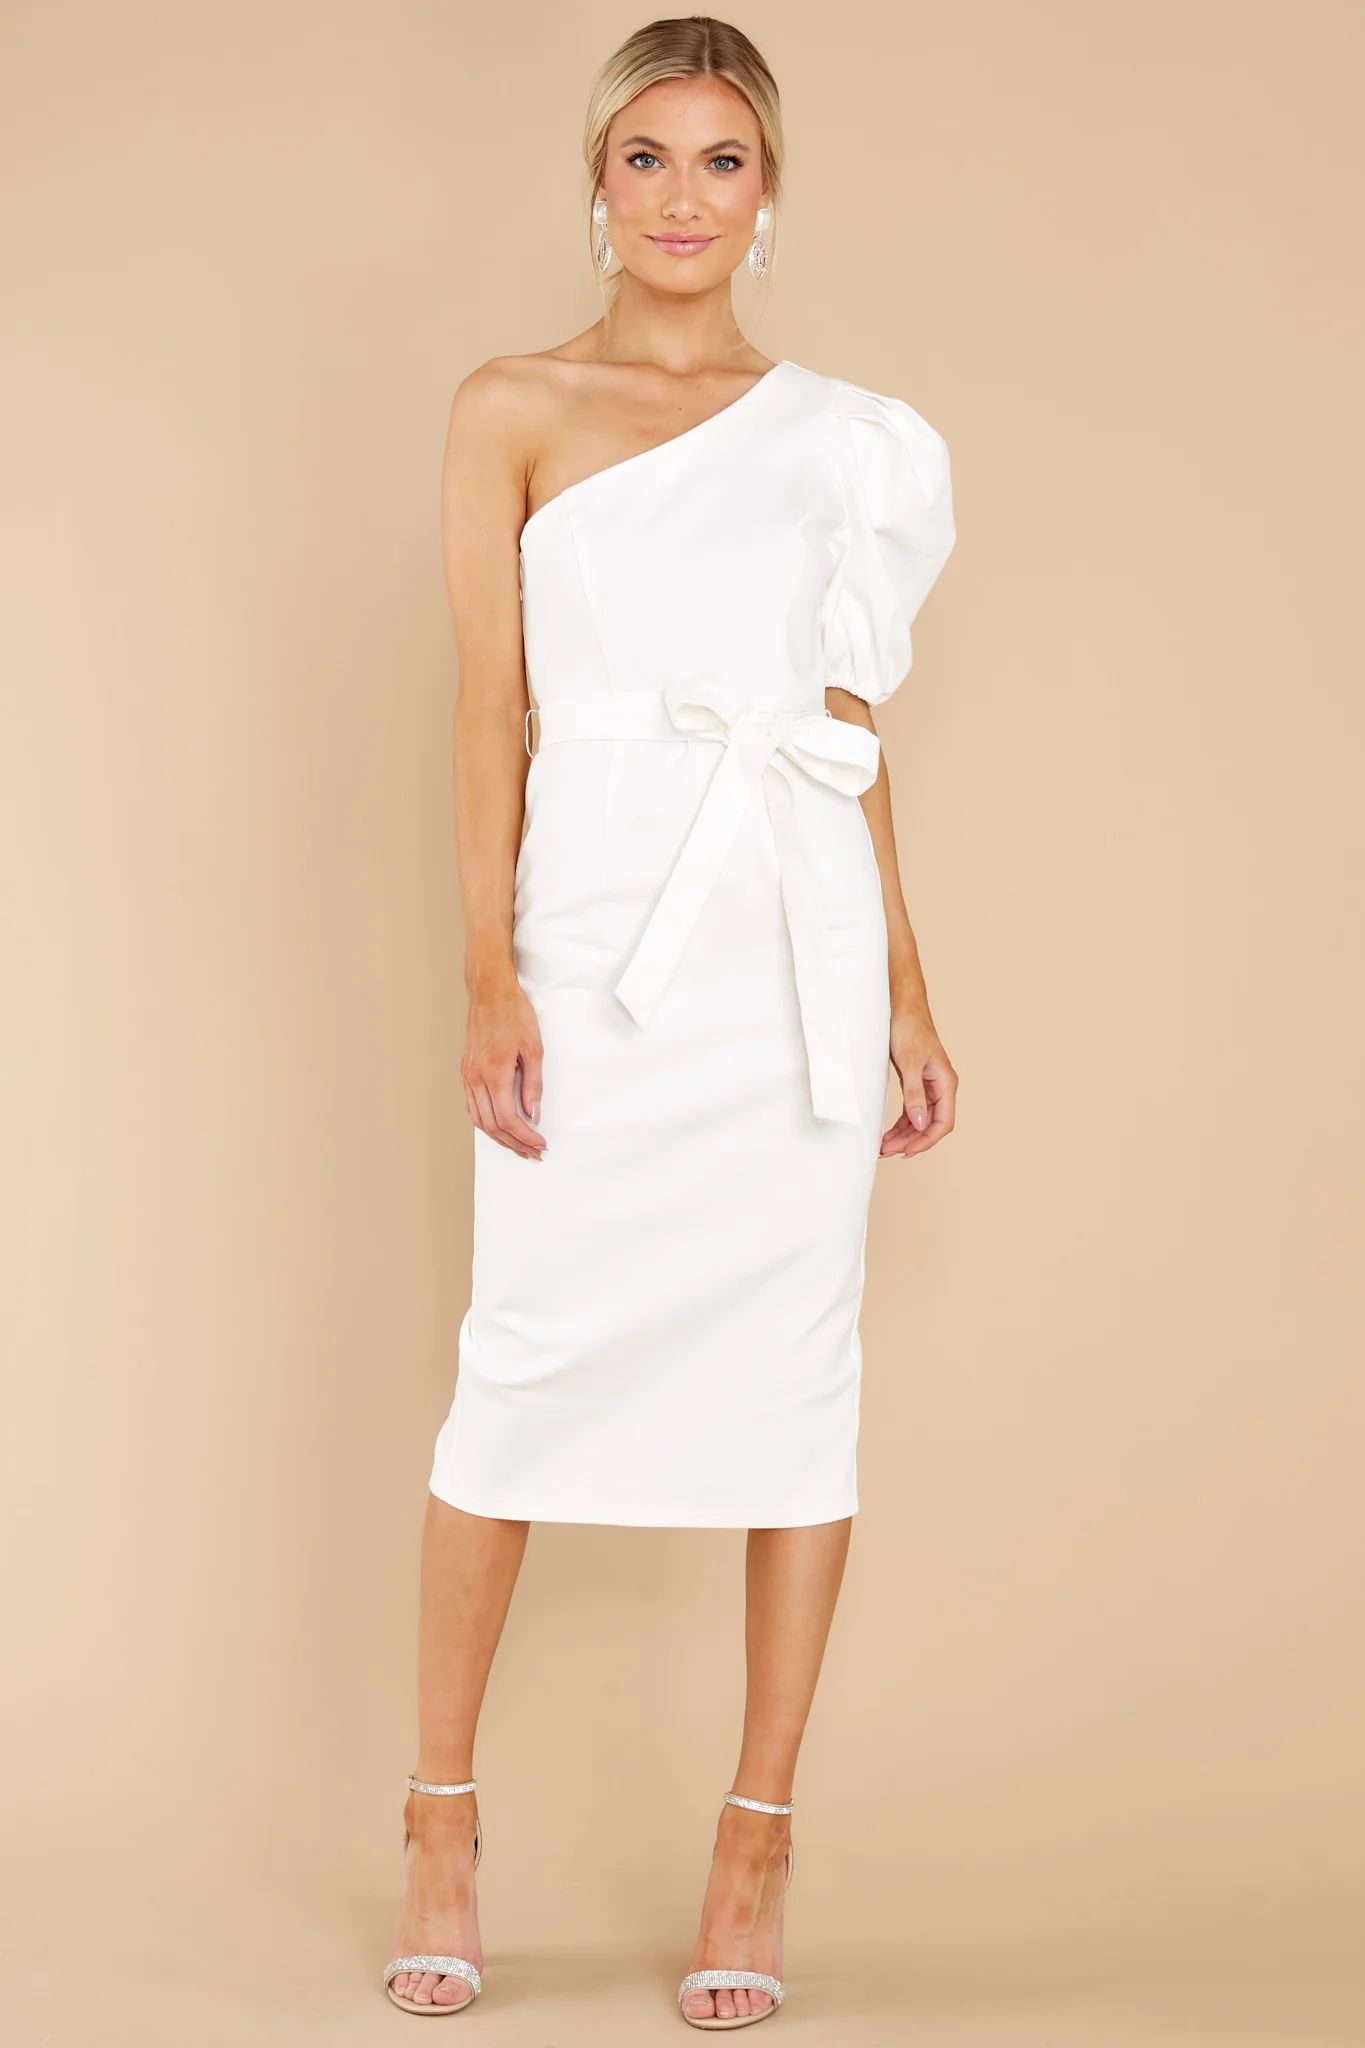 Simply Classic White One Shoulder Midi Dress | Red Dress 